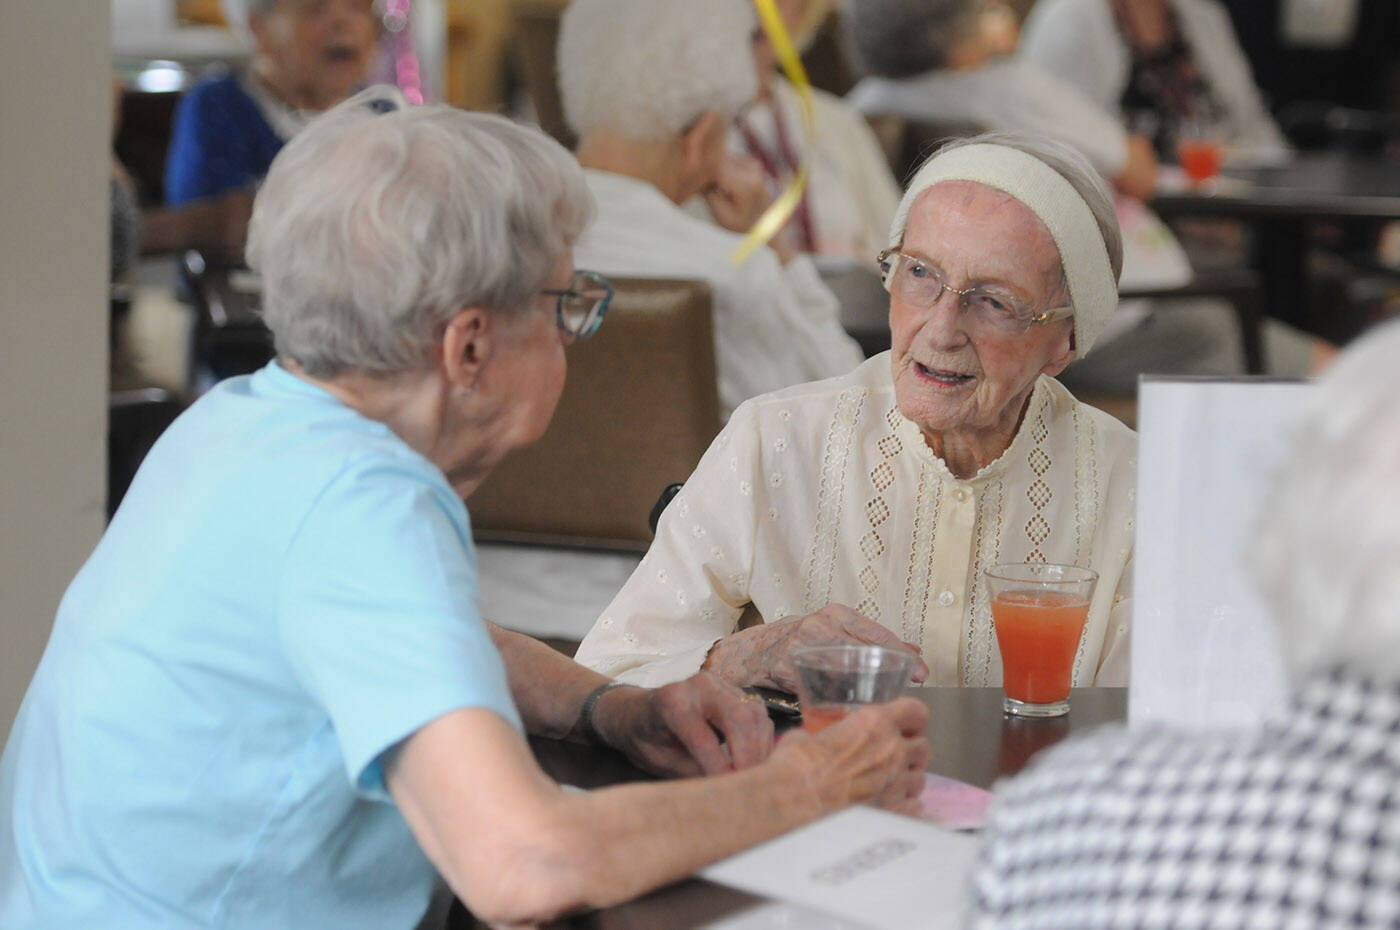 Hedy Sutulov celebrates her 108th birthday with her friends on Aug. 10, 2022 at Chartwell Birchwood Retirement Residence where she lives. She turned 108 on Aug. 18, 2022. (Jenna Hauck/ Chilliwack Progress)